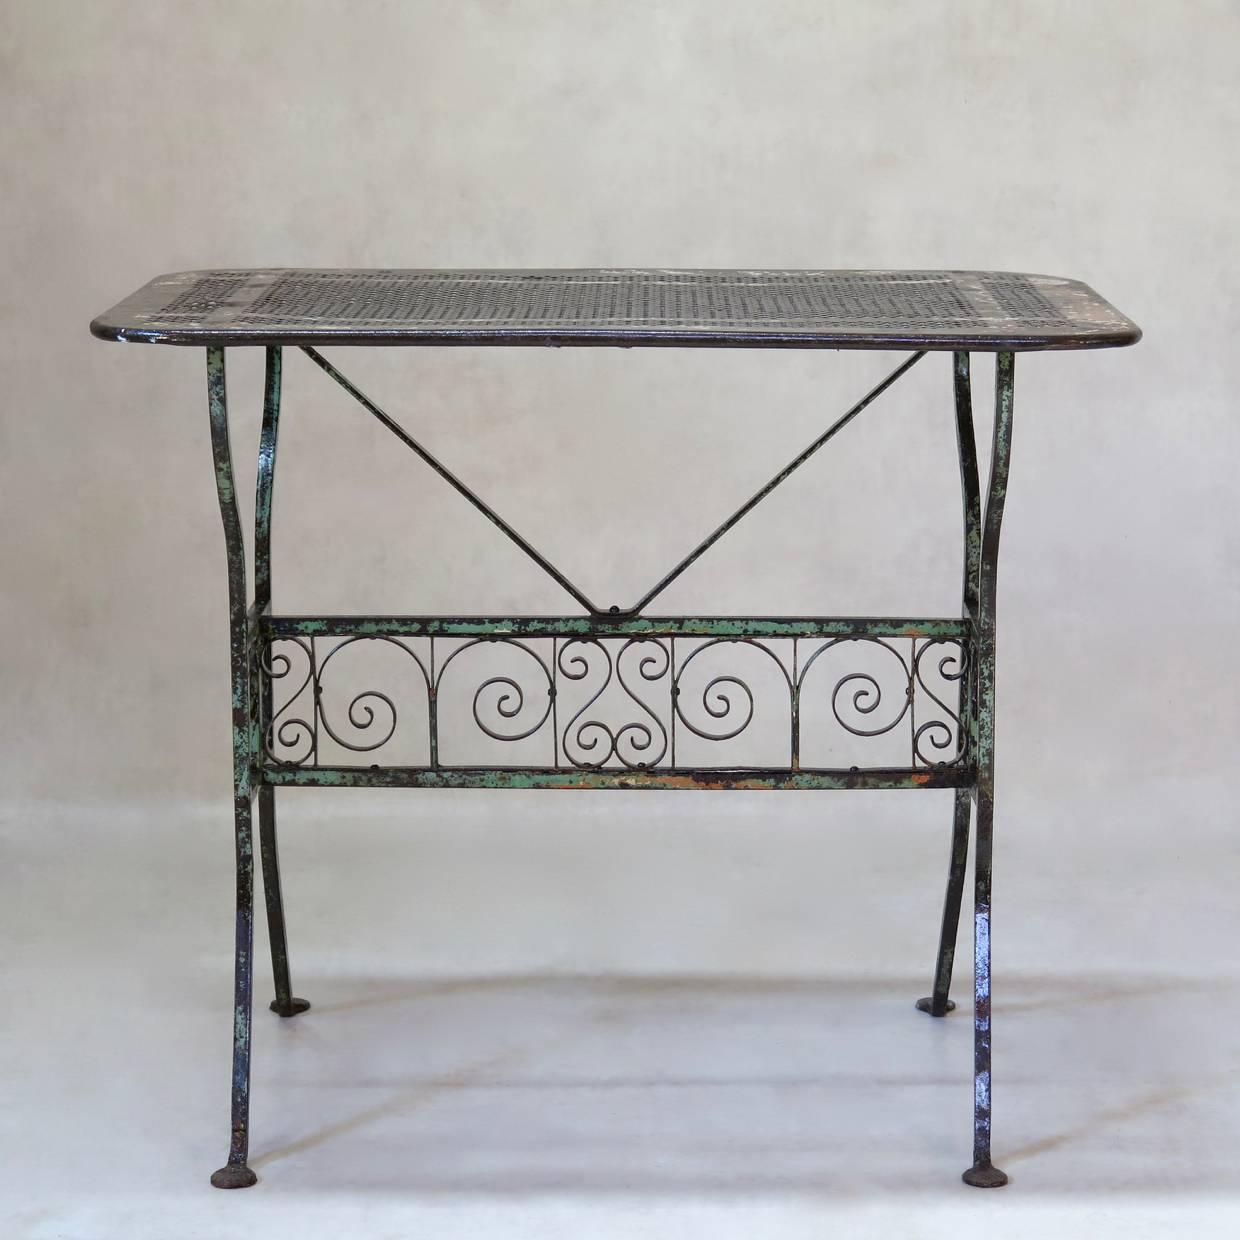 Unusual and elegant wrought iron table retaining some original orange and green paint. Cloverleaf-patterned sheet metal top.